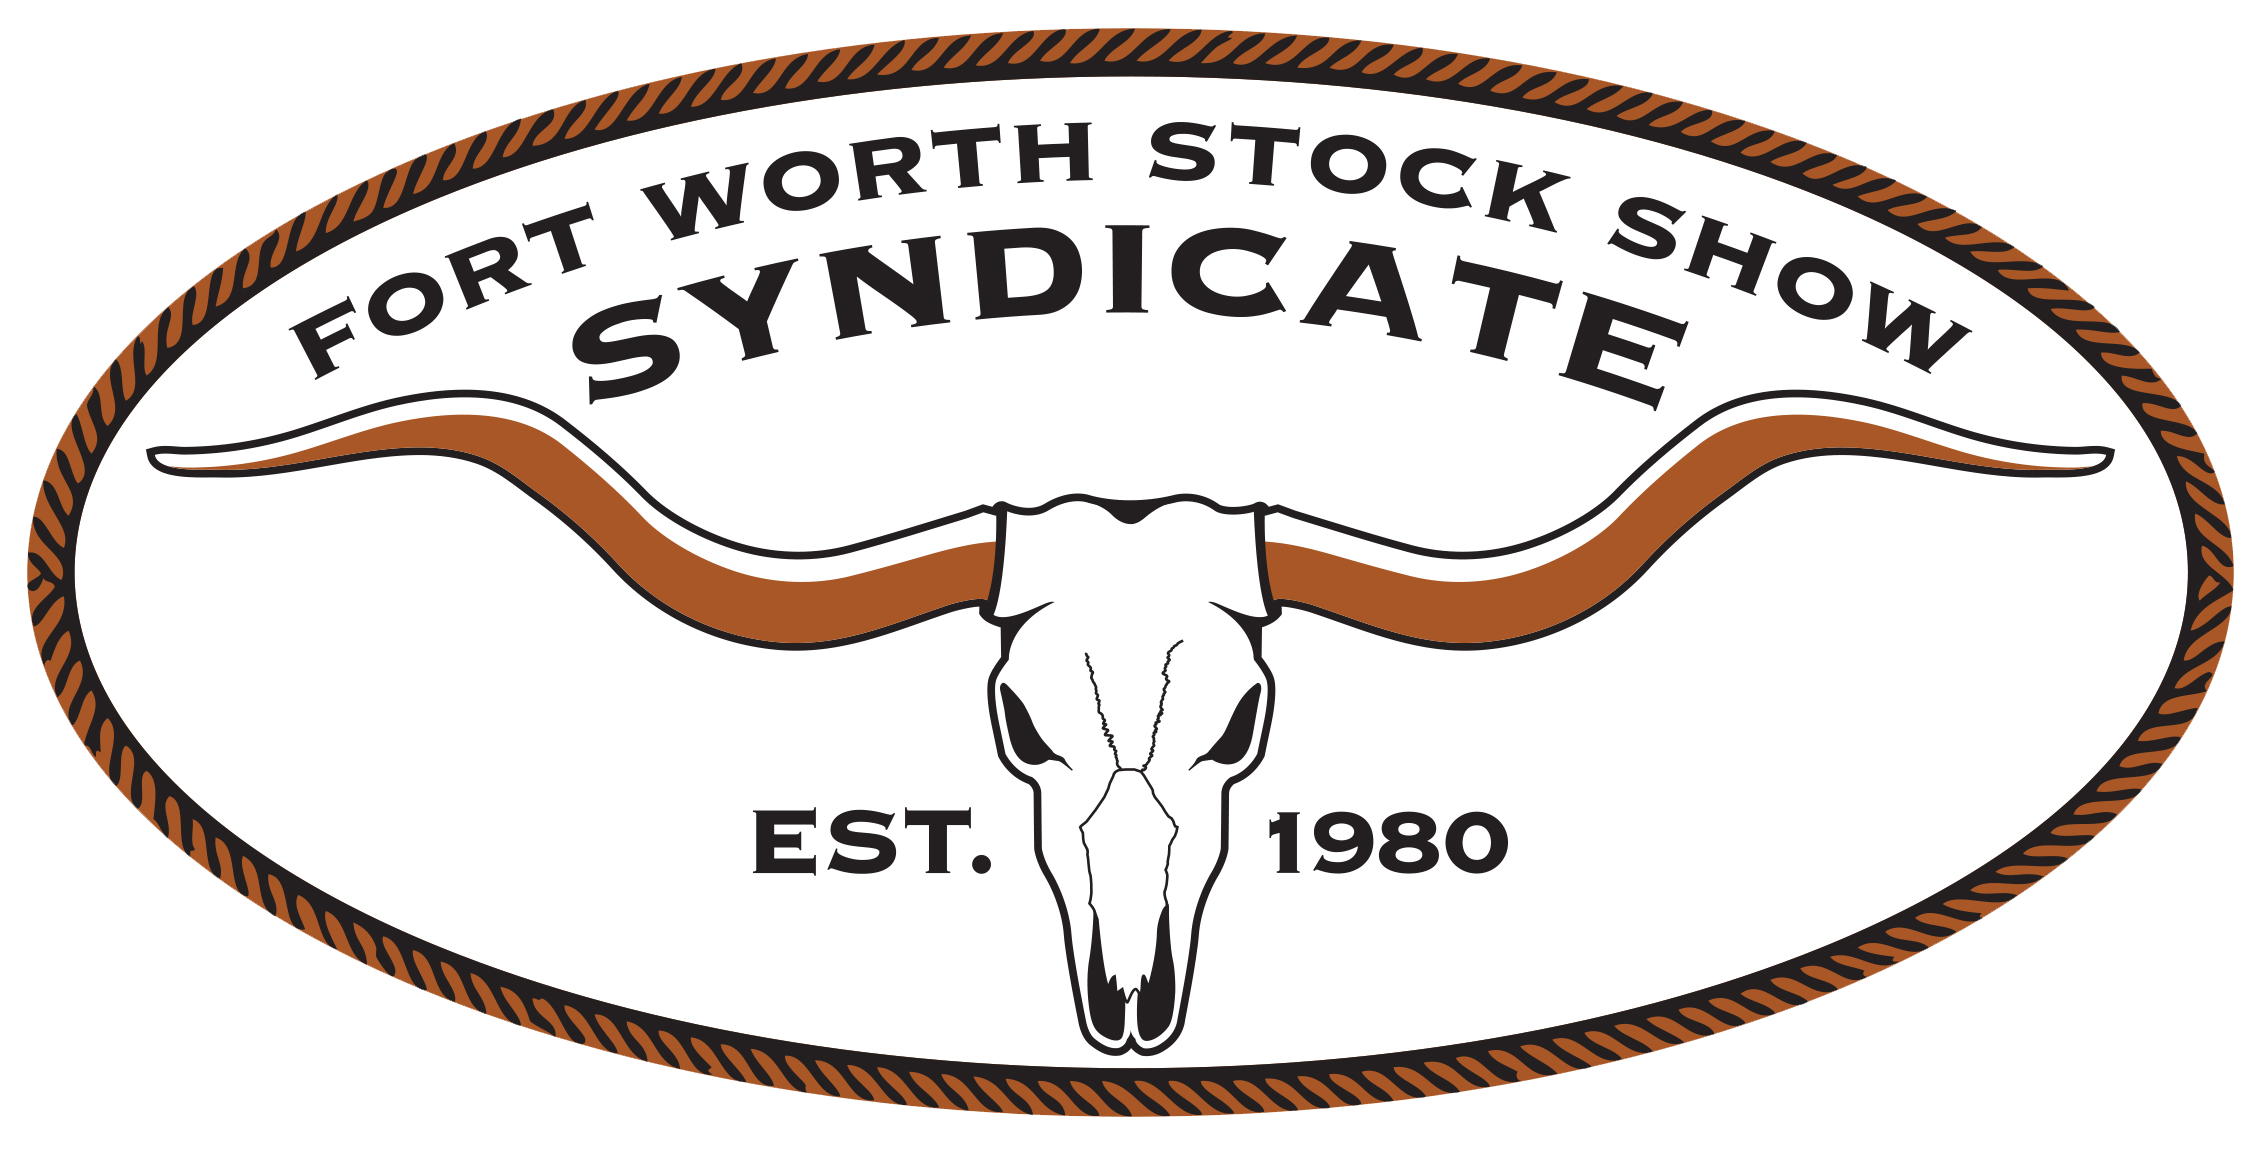 Fort Worth Stock Show Syndicate